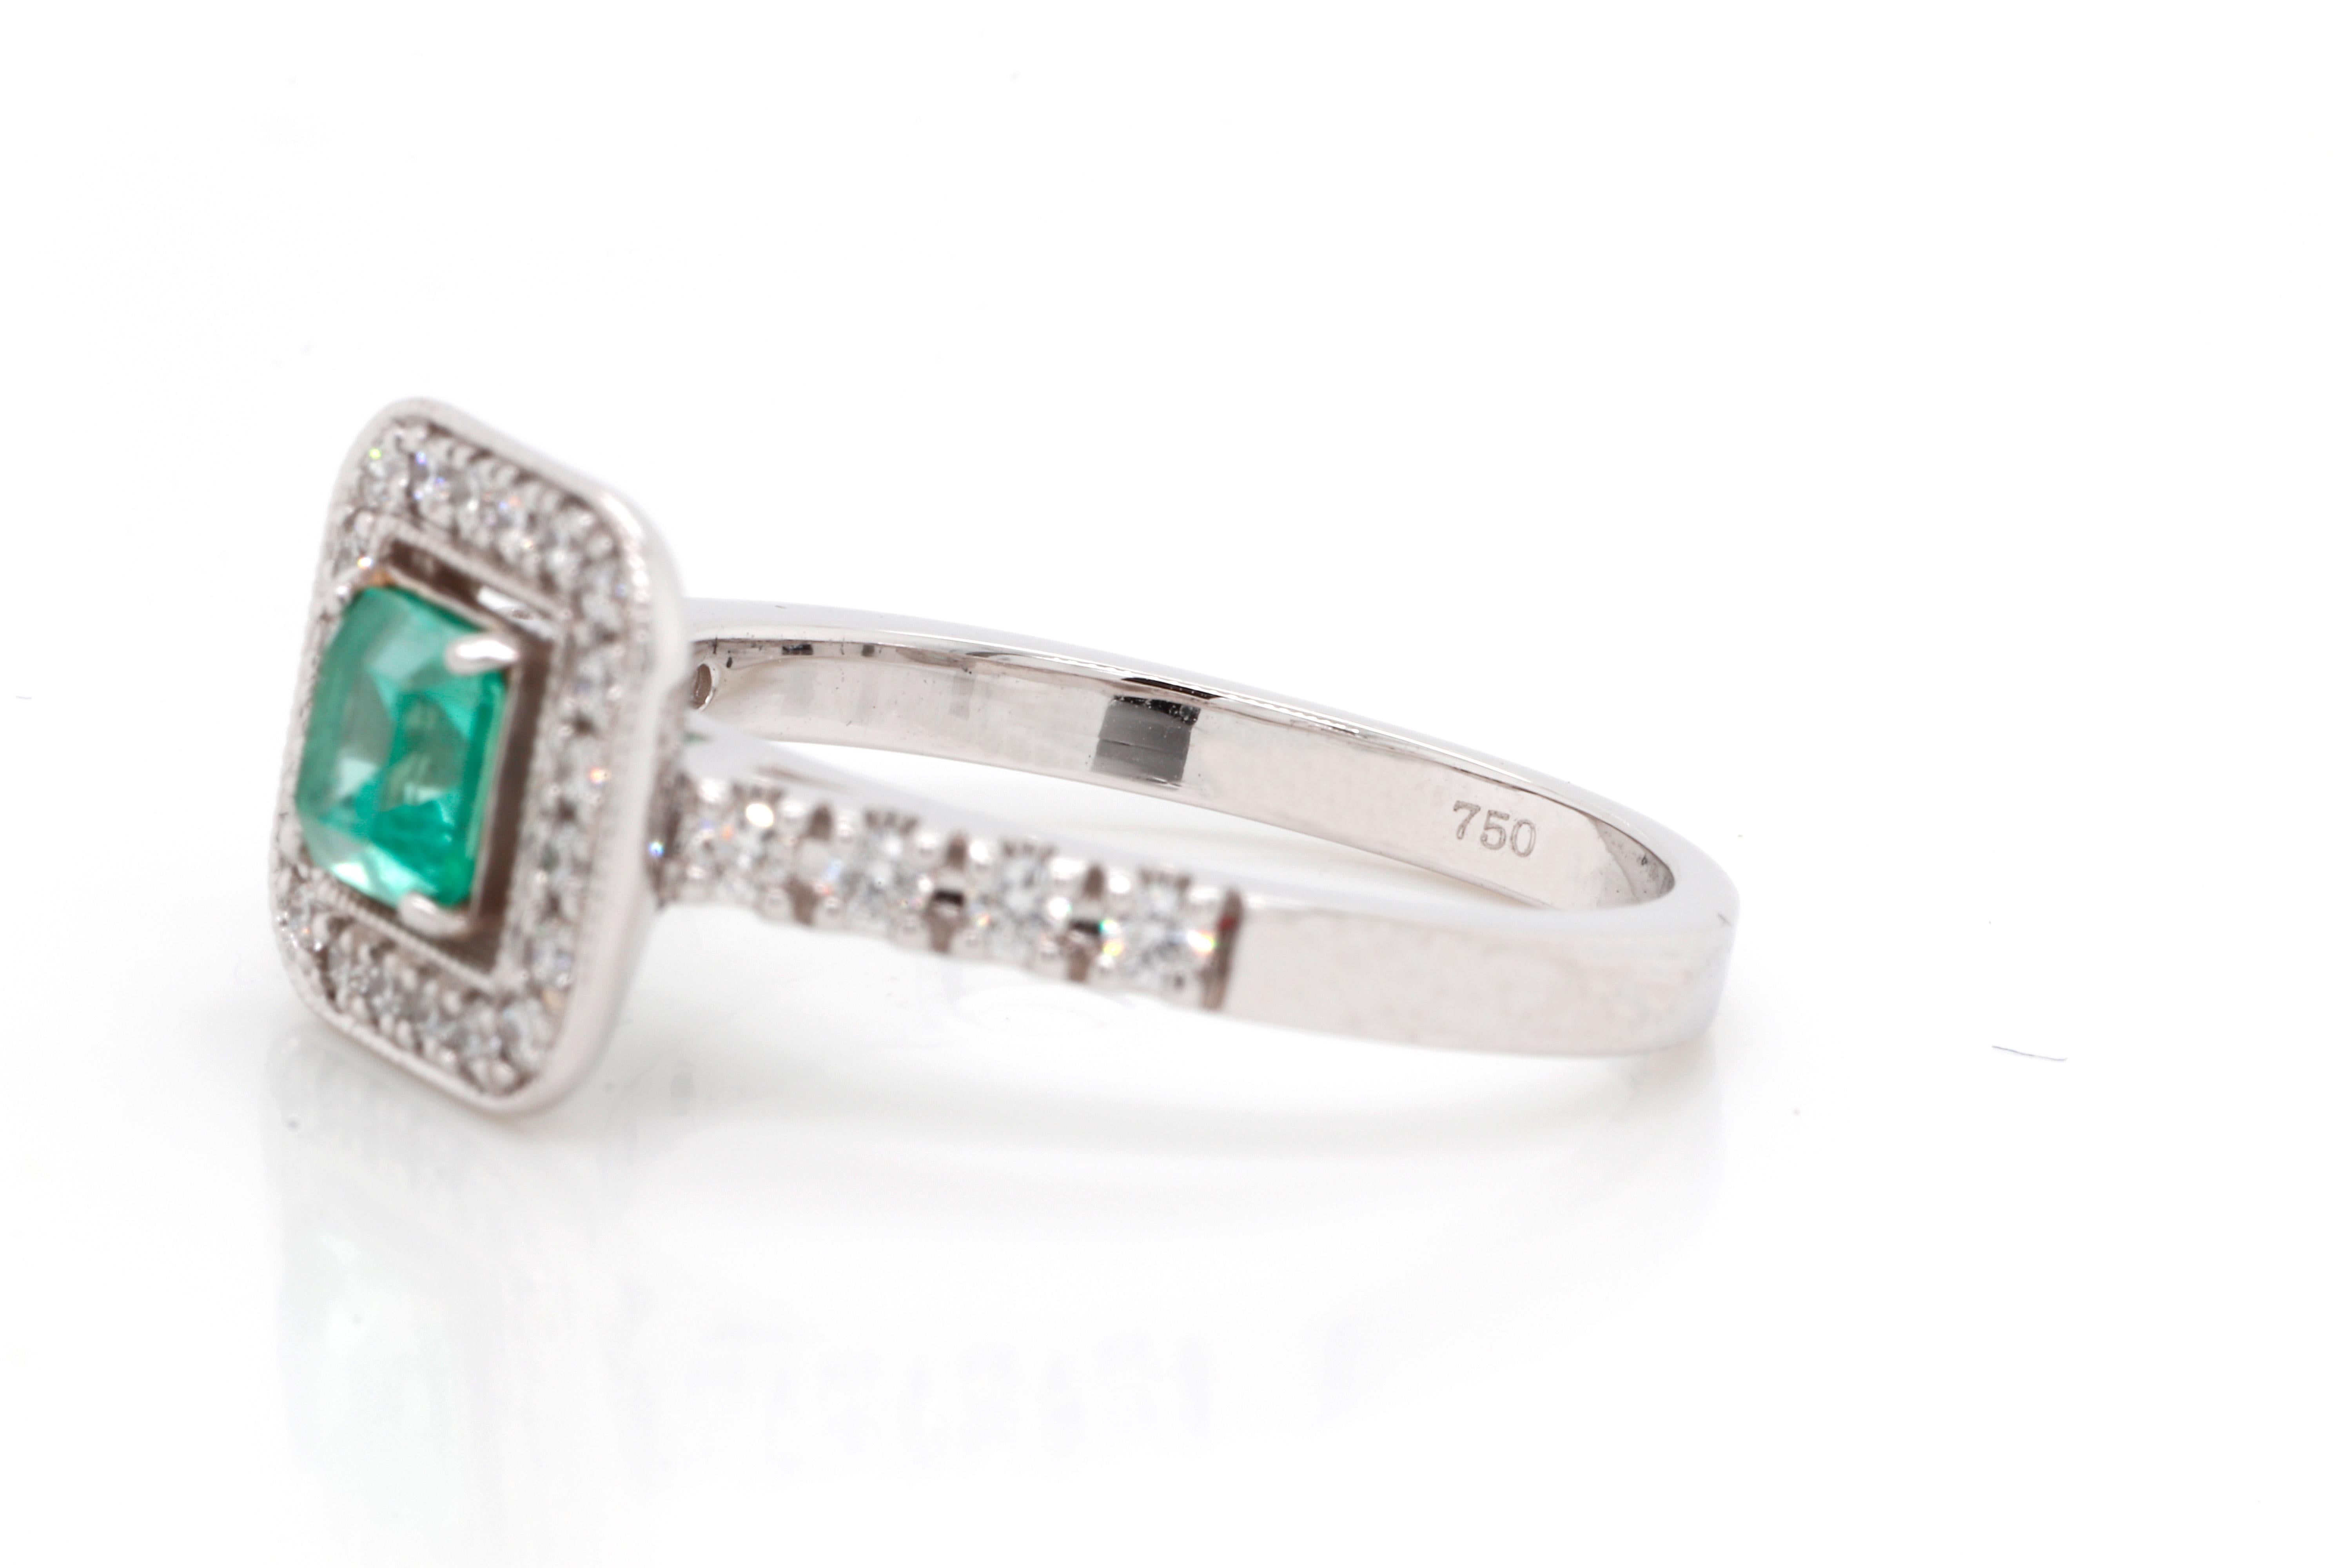 Classic 0.48 ct Emerald White Gold Ring accented with natural 0.32 ctw Diamonds G-H color and VVS1 clarity. This eye-catching ring is perfect for everyday wear and for any speciall occasion. It can also be used as engagement or wedding ring.